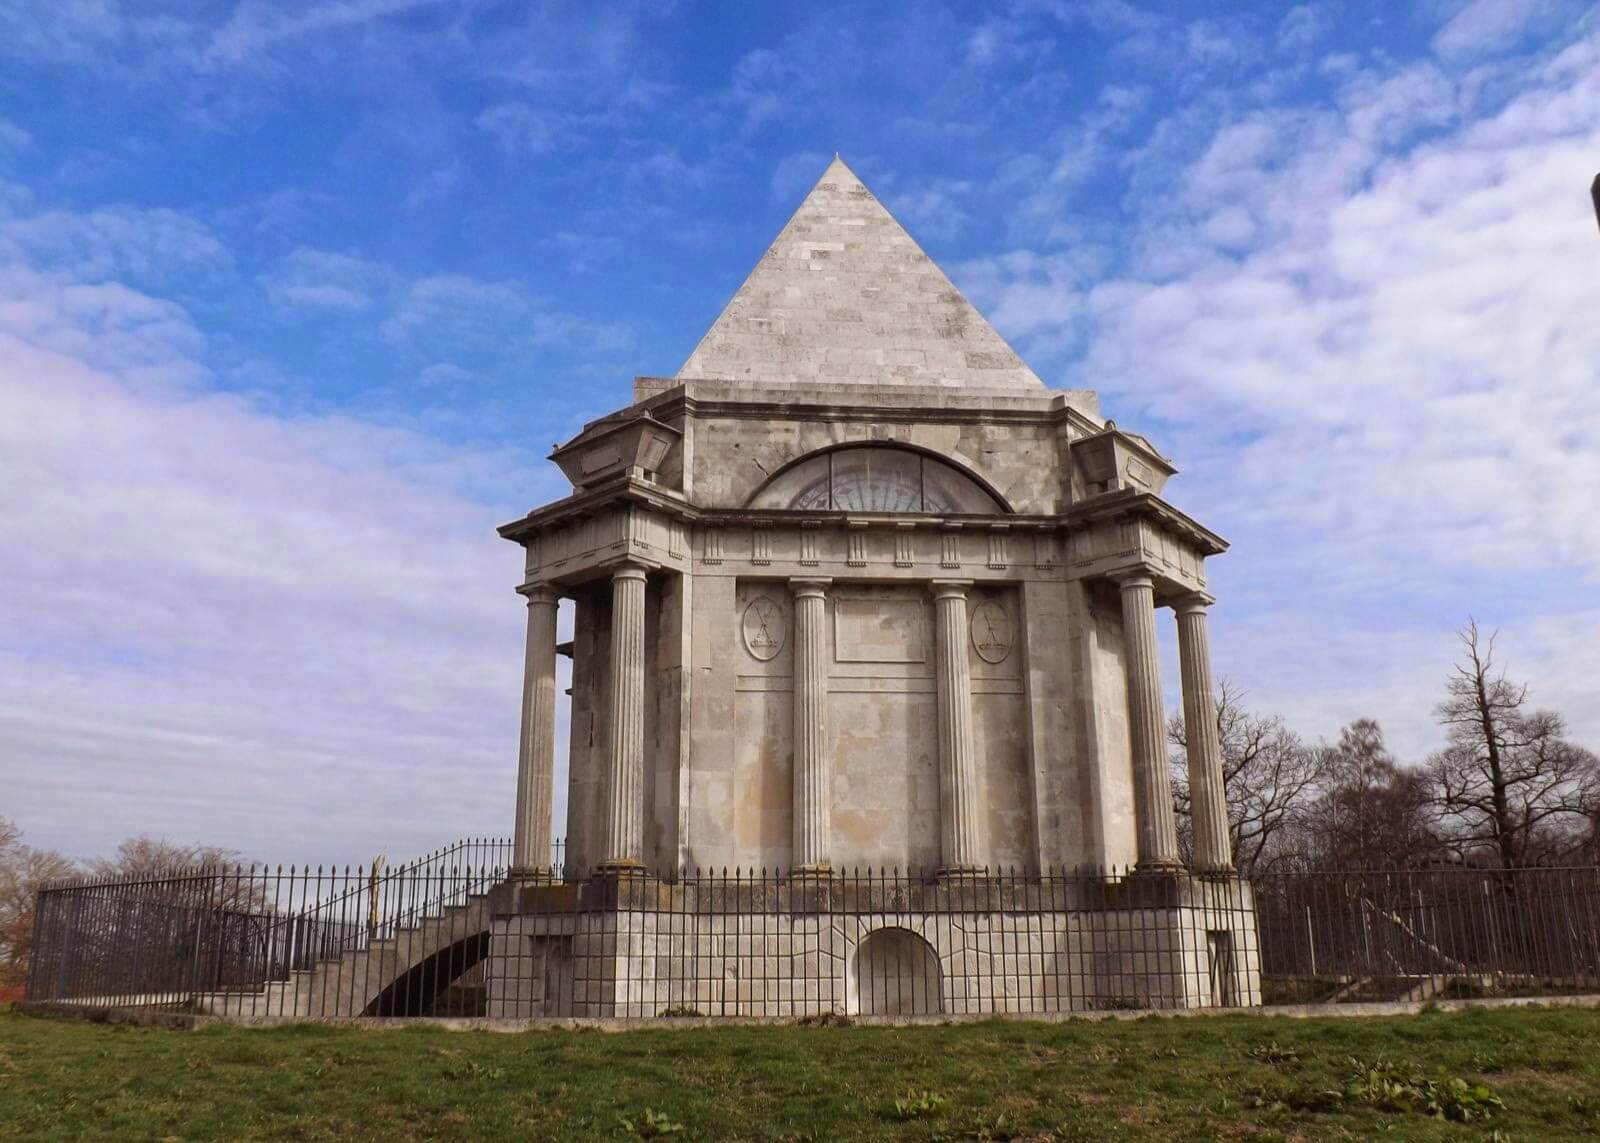 Cobham Mausoleum with blue skies. Credit to Mary Allwood.